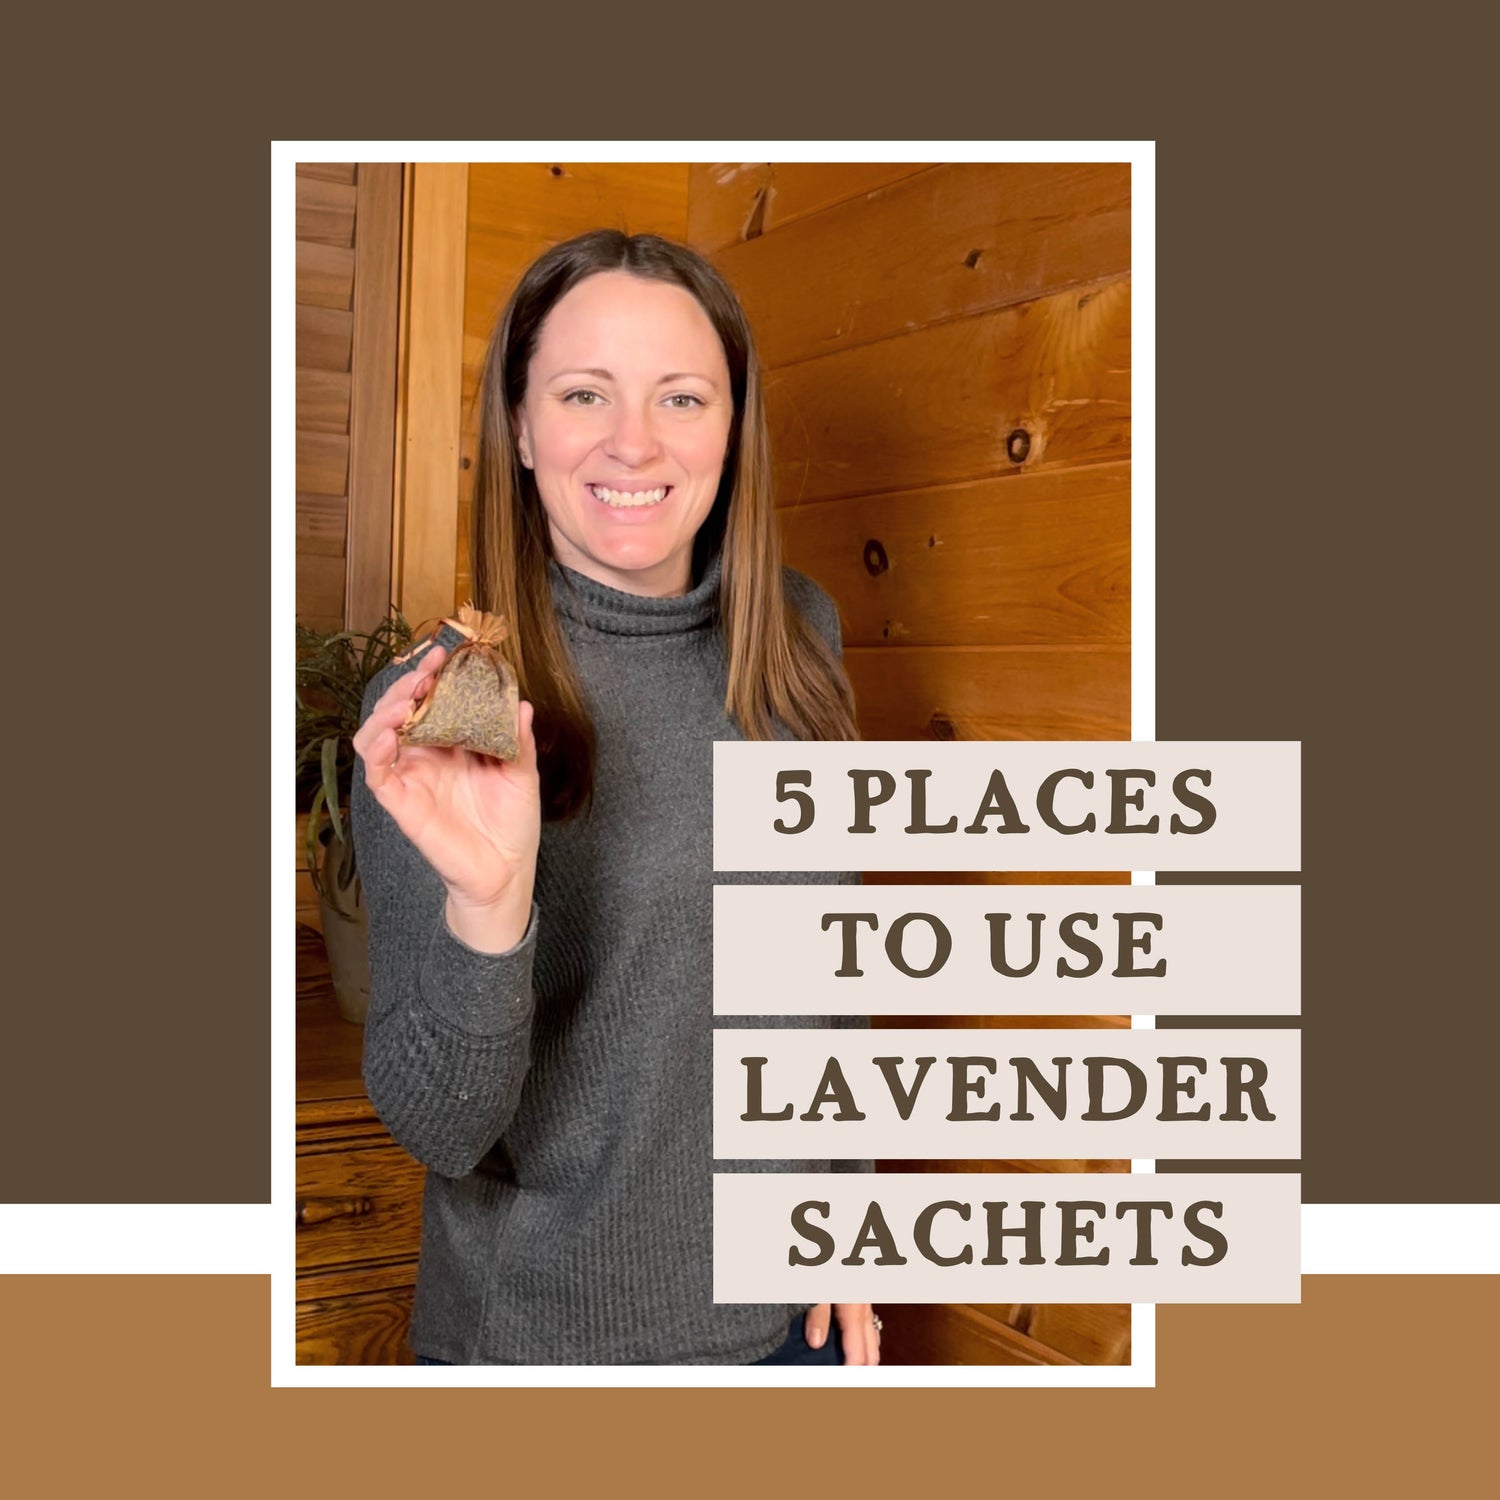 5 Places to Use Lavender Sachets in Your Home